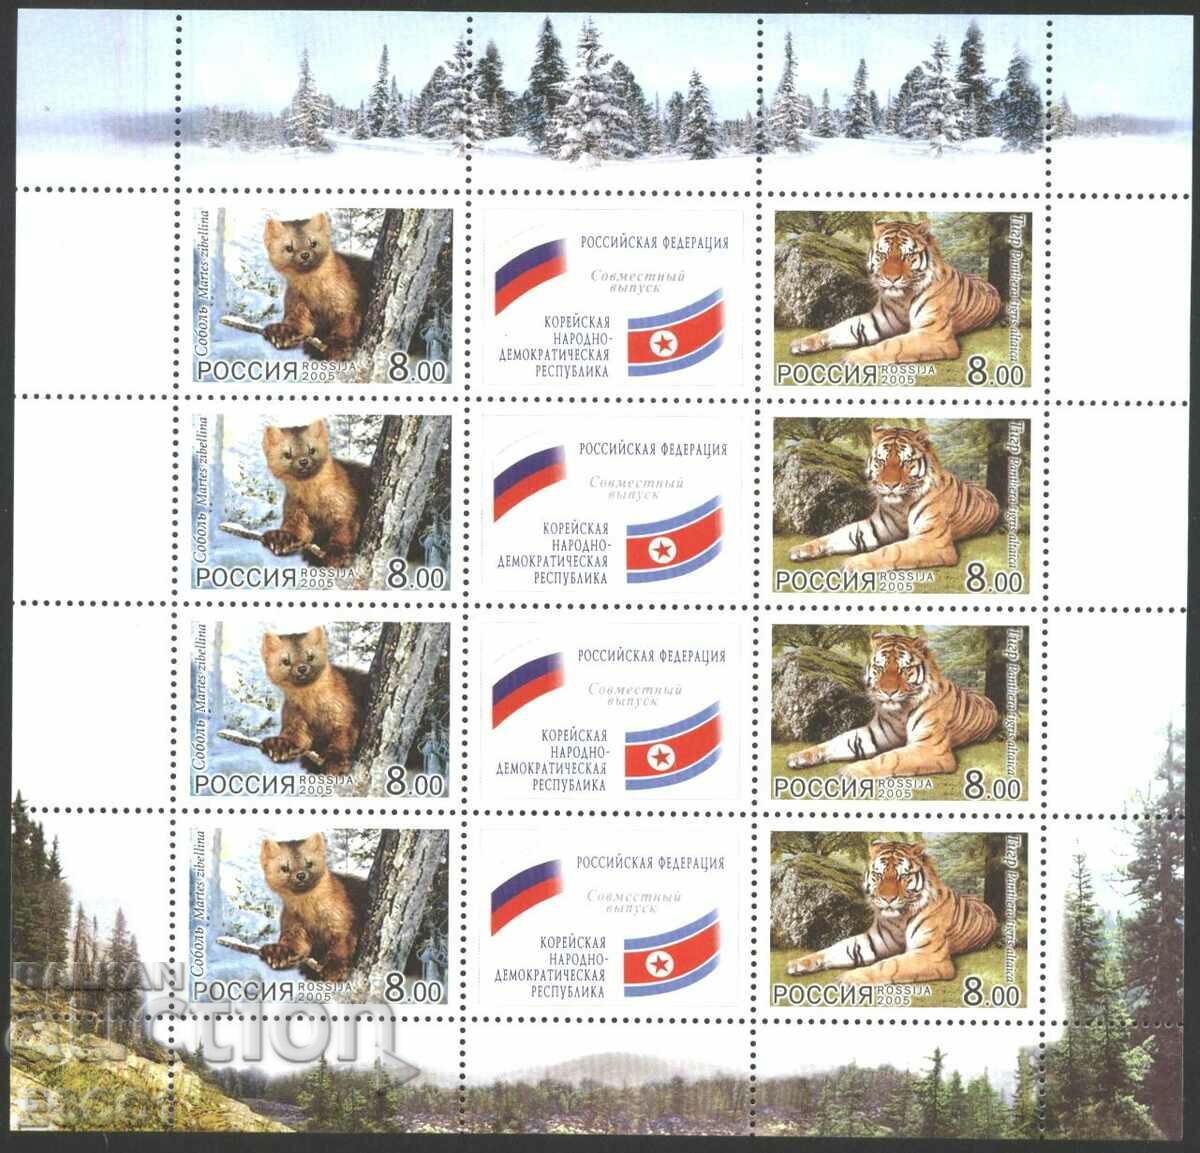 Clean stamps in small sheet Fauna Samur Tiger 2005 from Russia